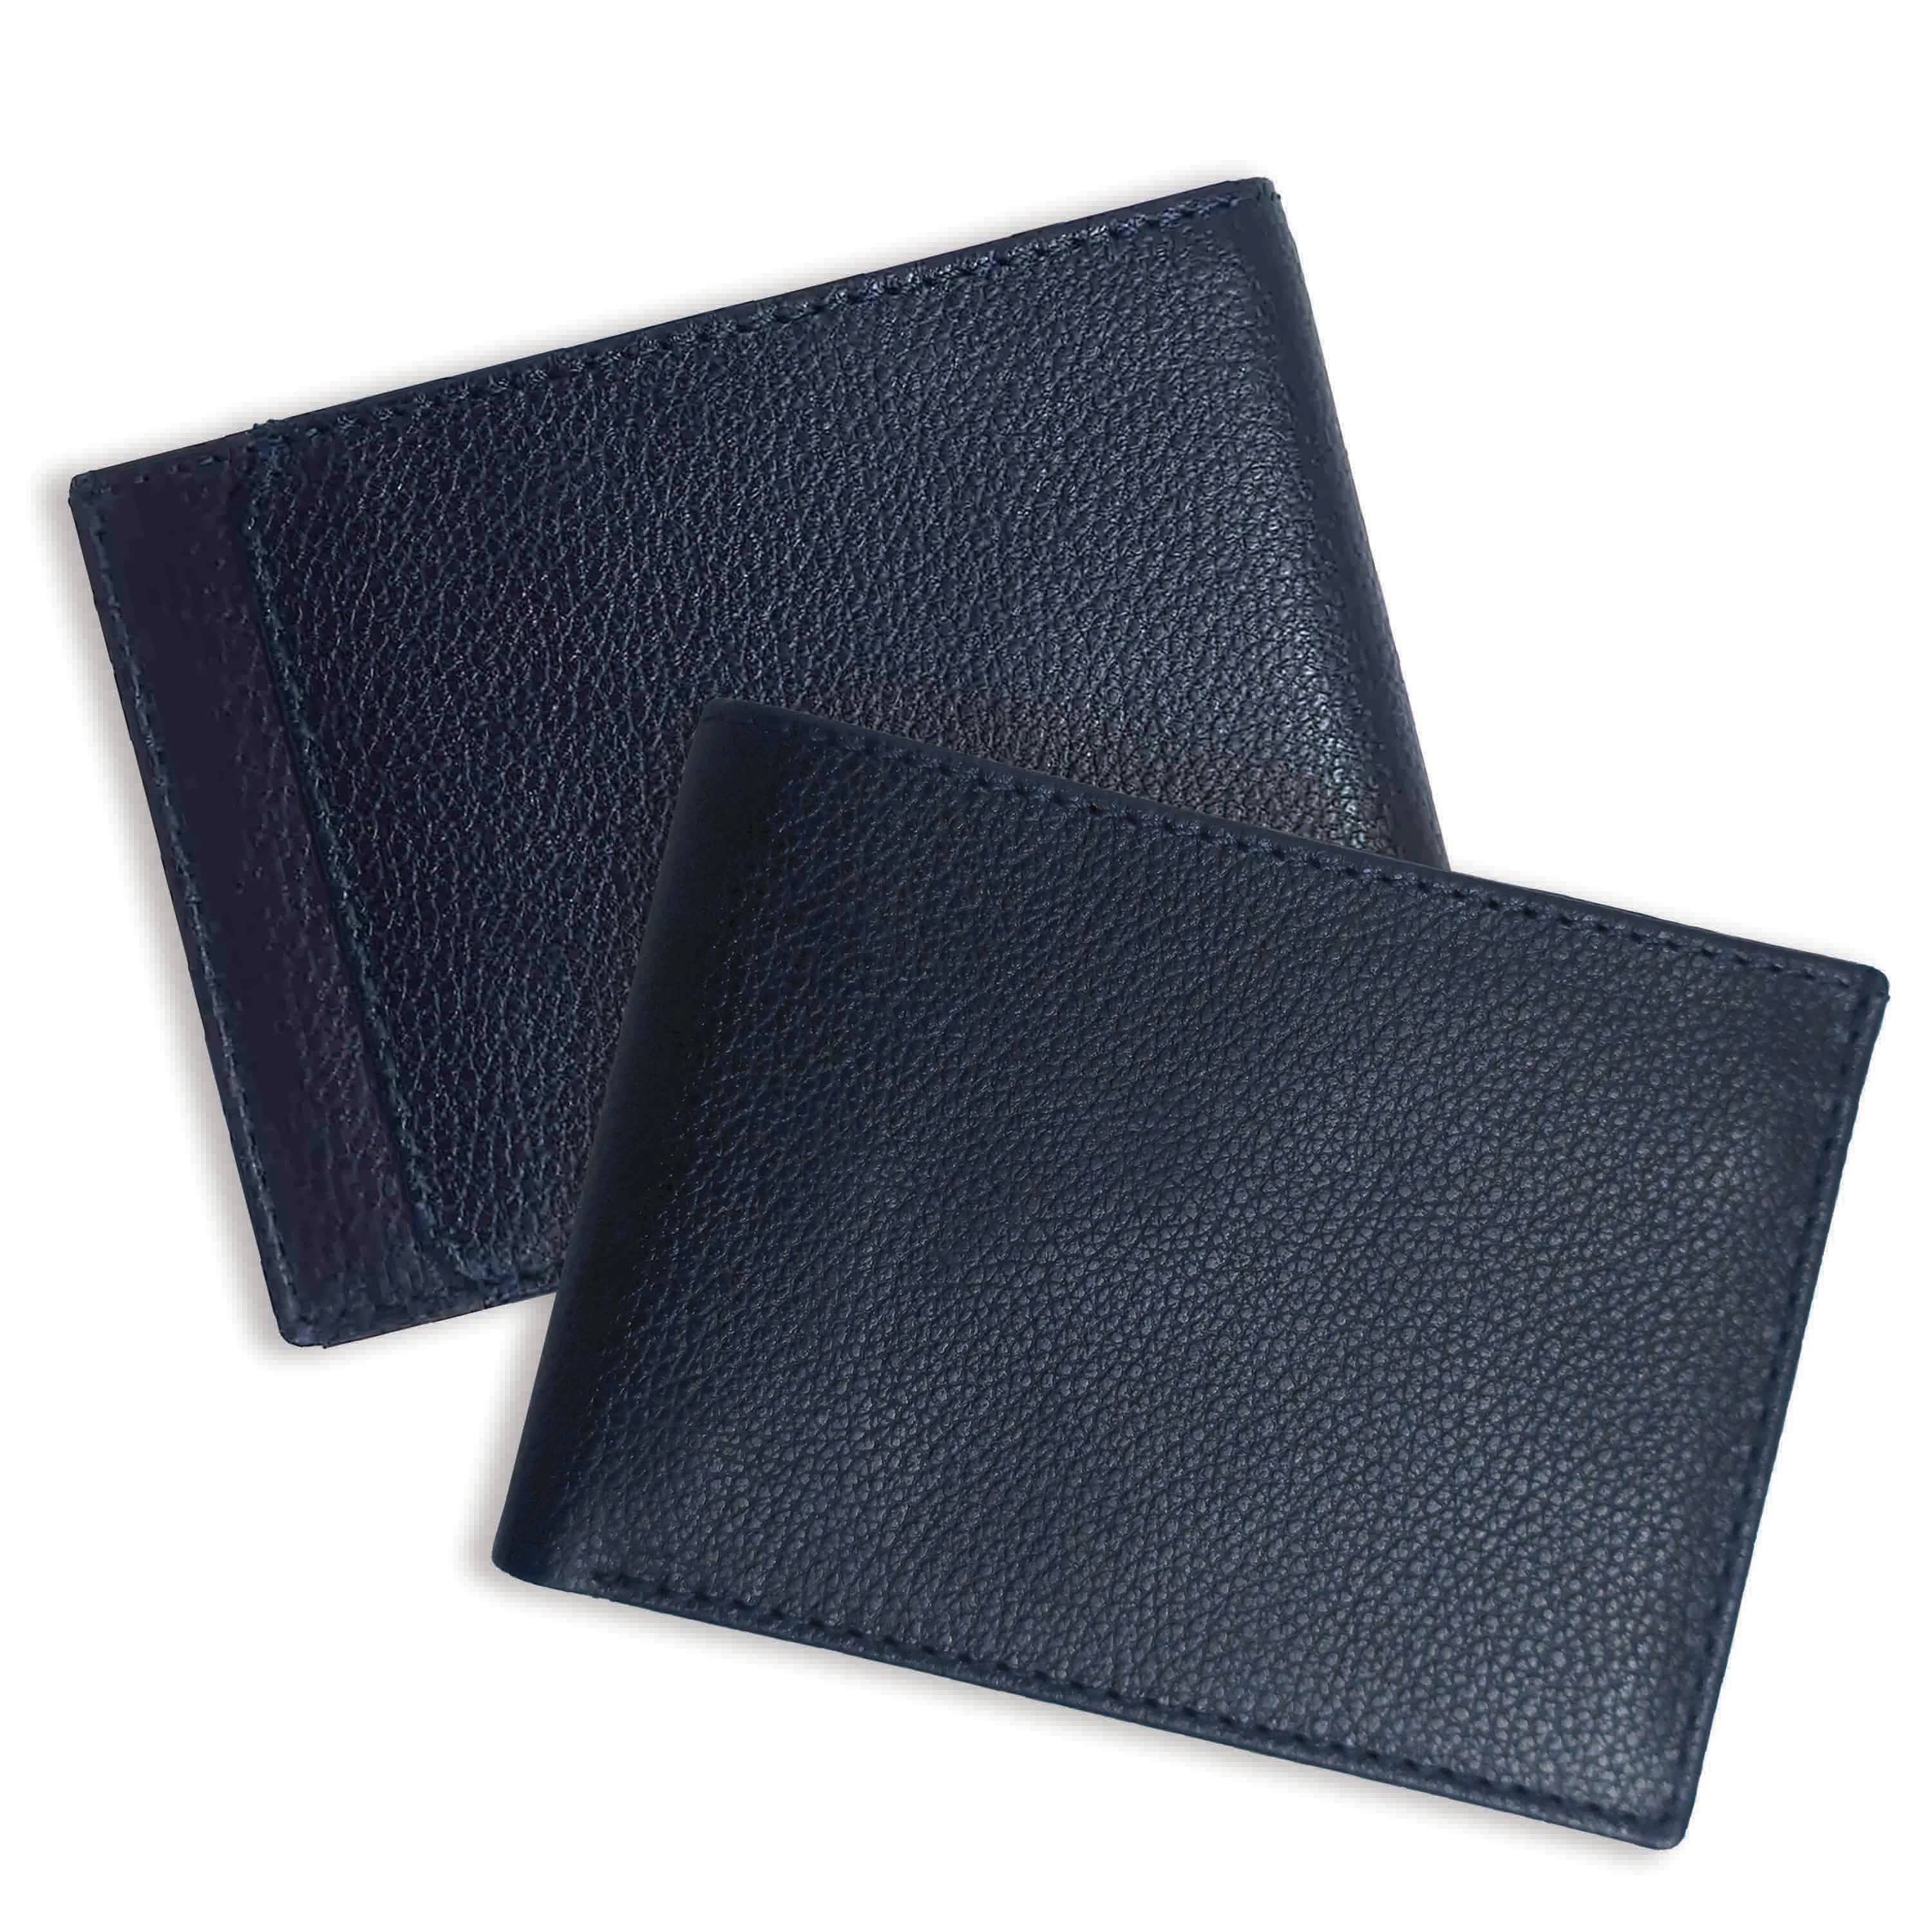 black leather wallets on a white background